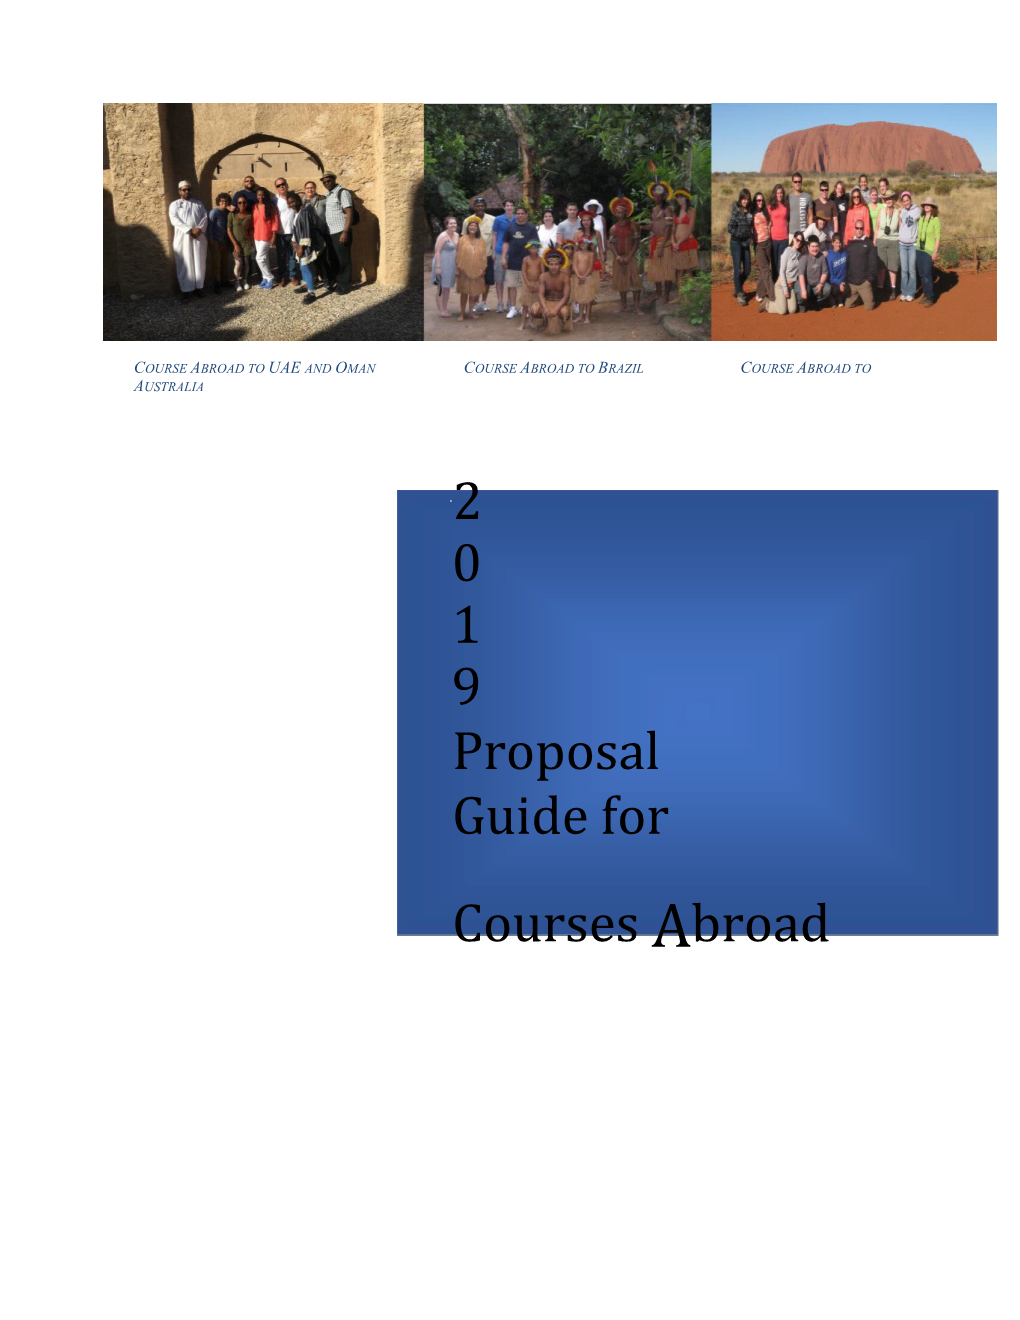 Faculty Guidelines for Courses Taught Abroad